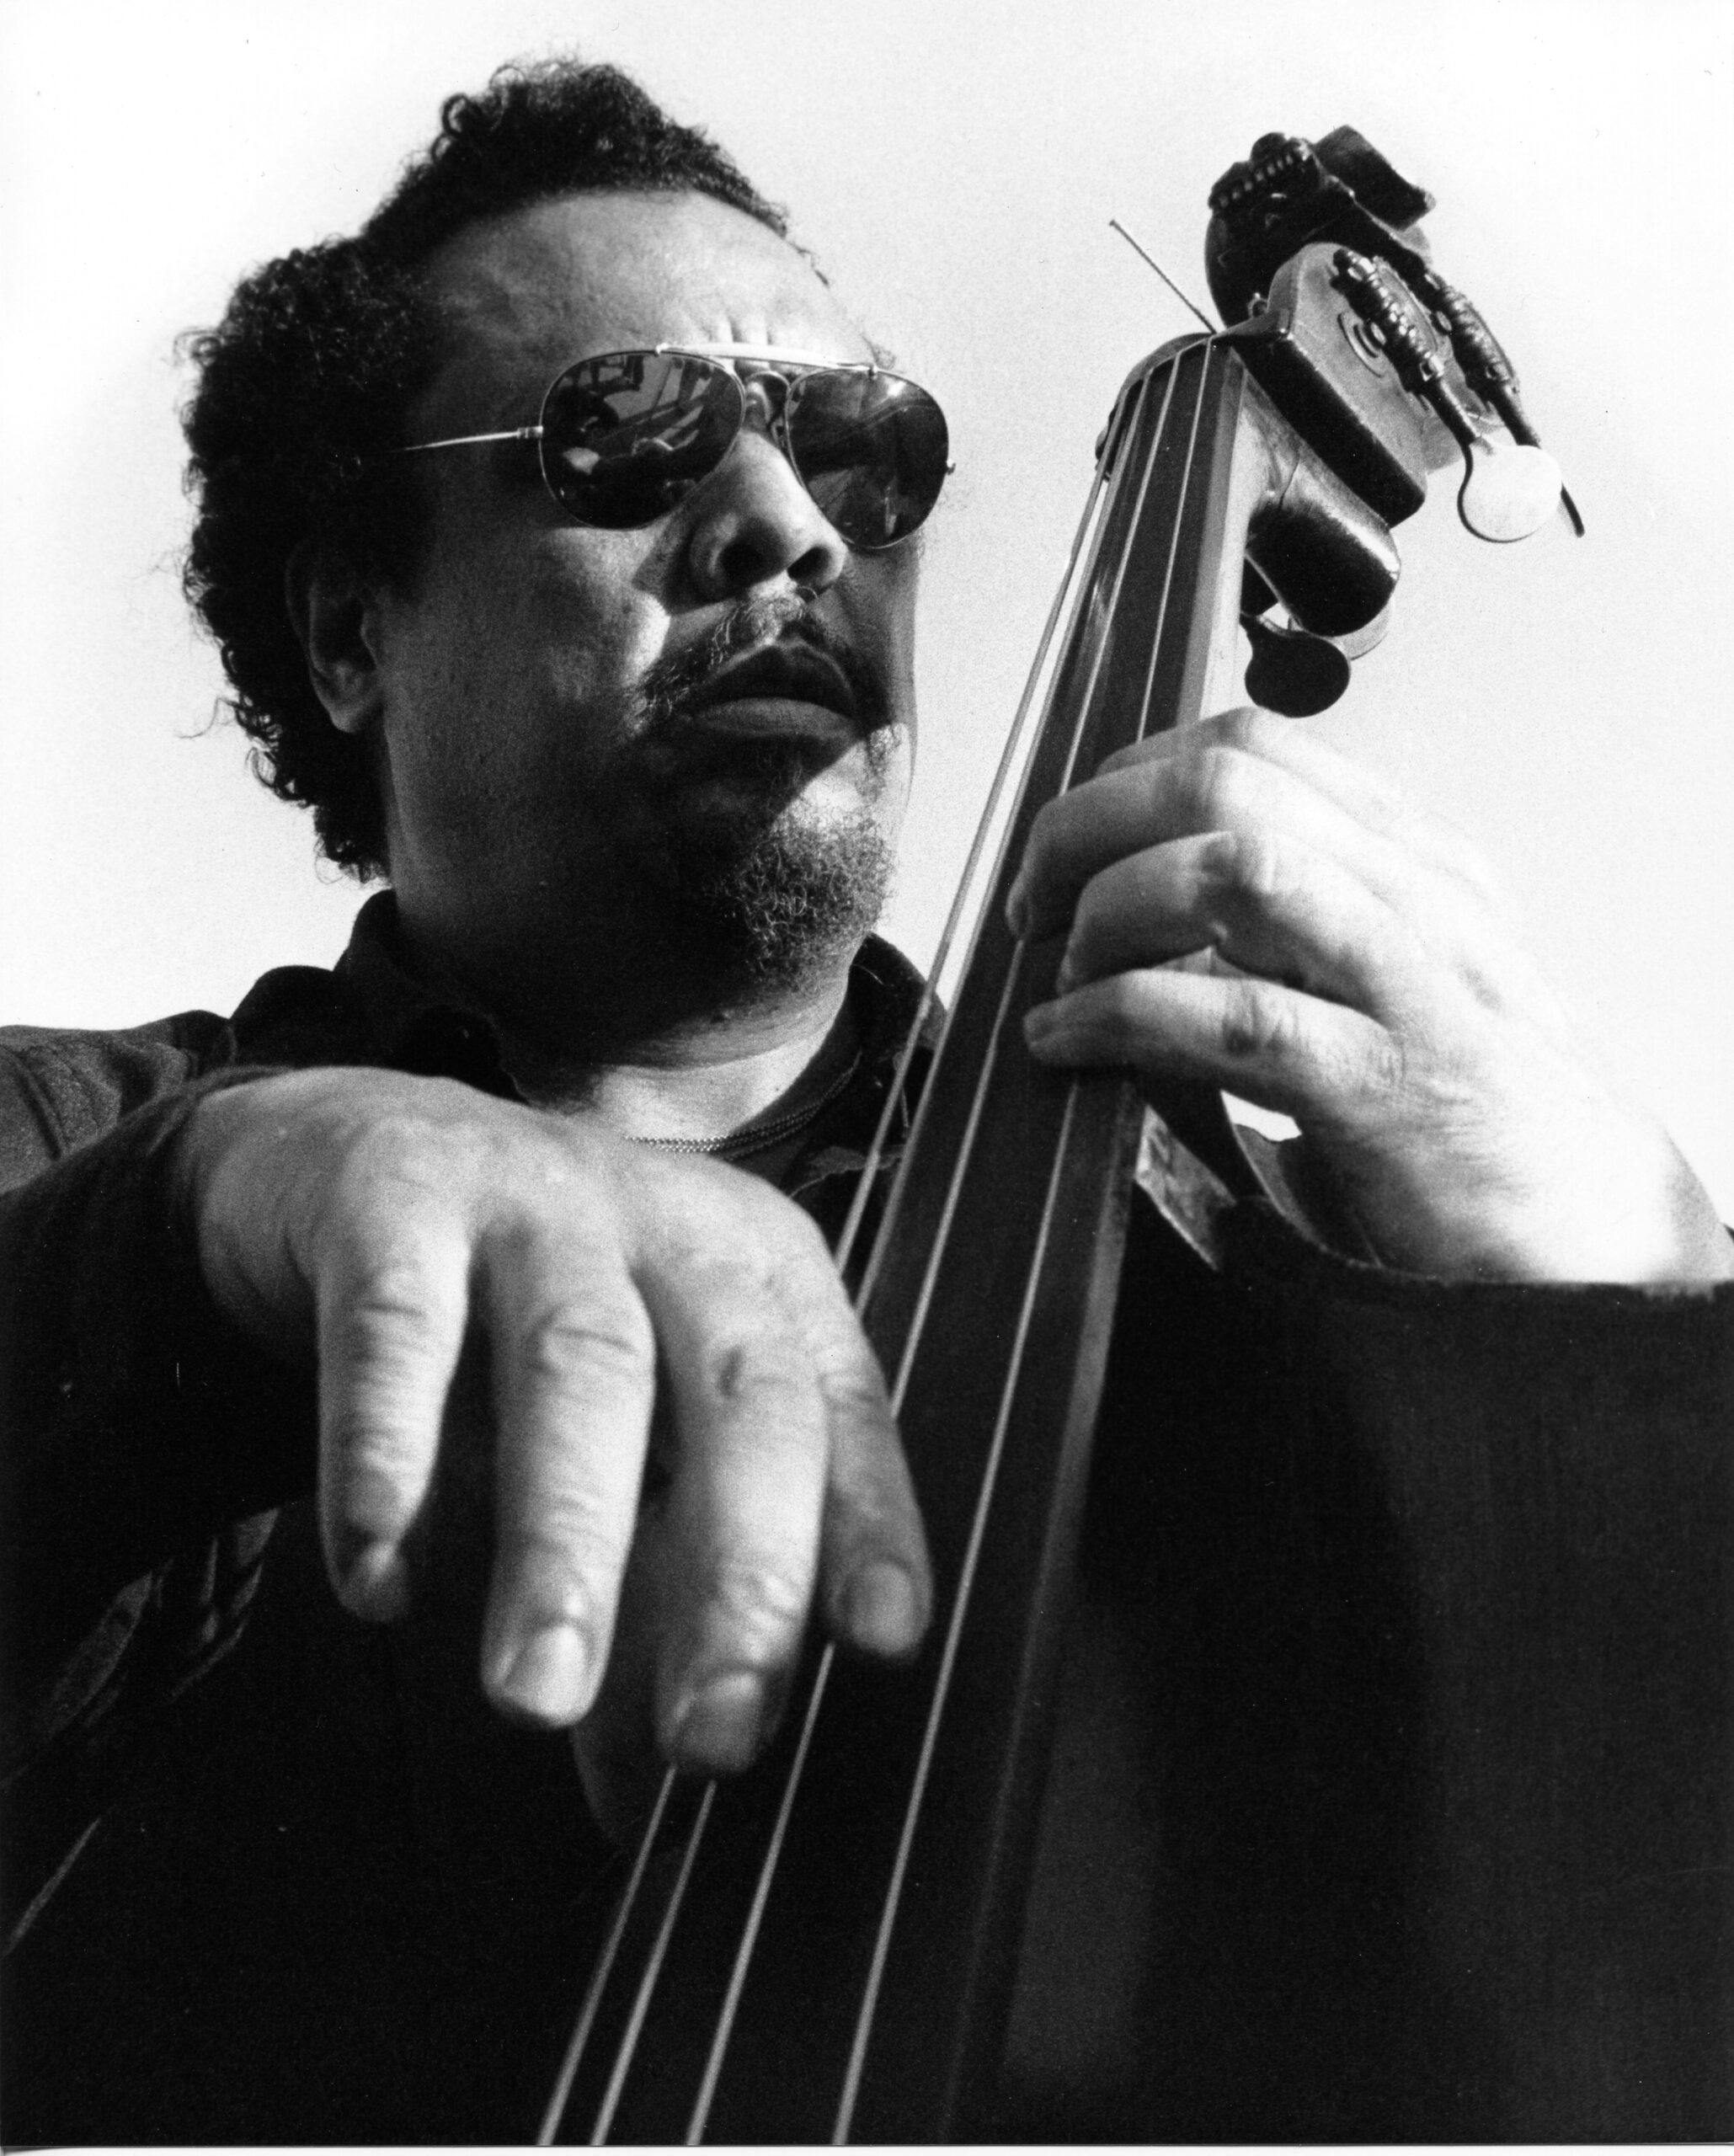 One of the most important figures in twentieth century American music, Charles Mingus was a virtuoso bass player, accomplished pianist, bandleader and composer.